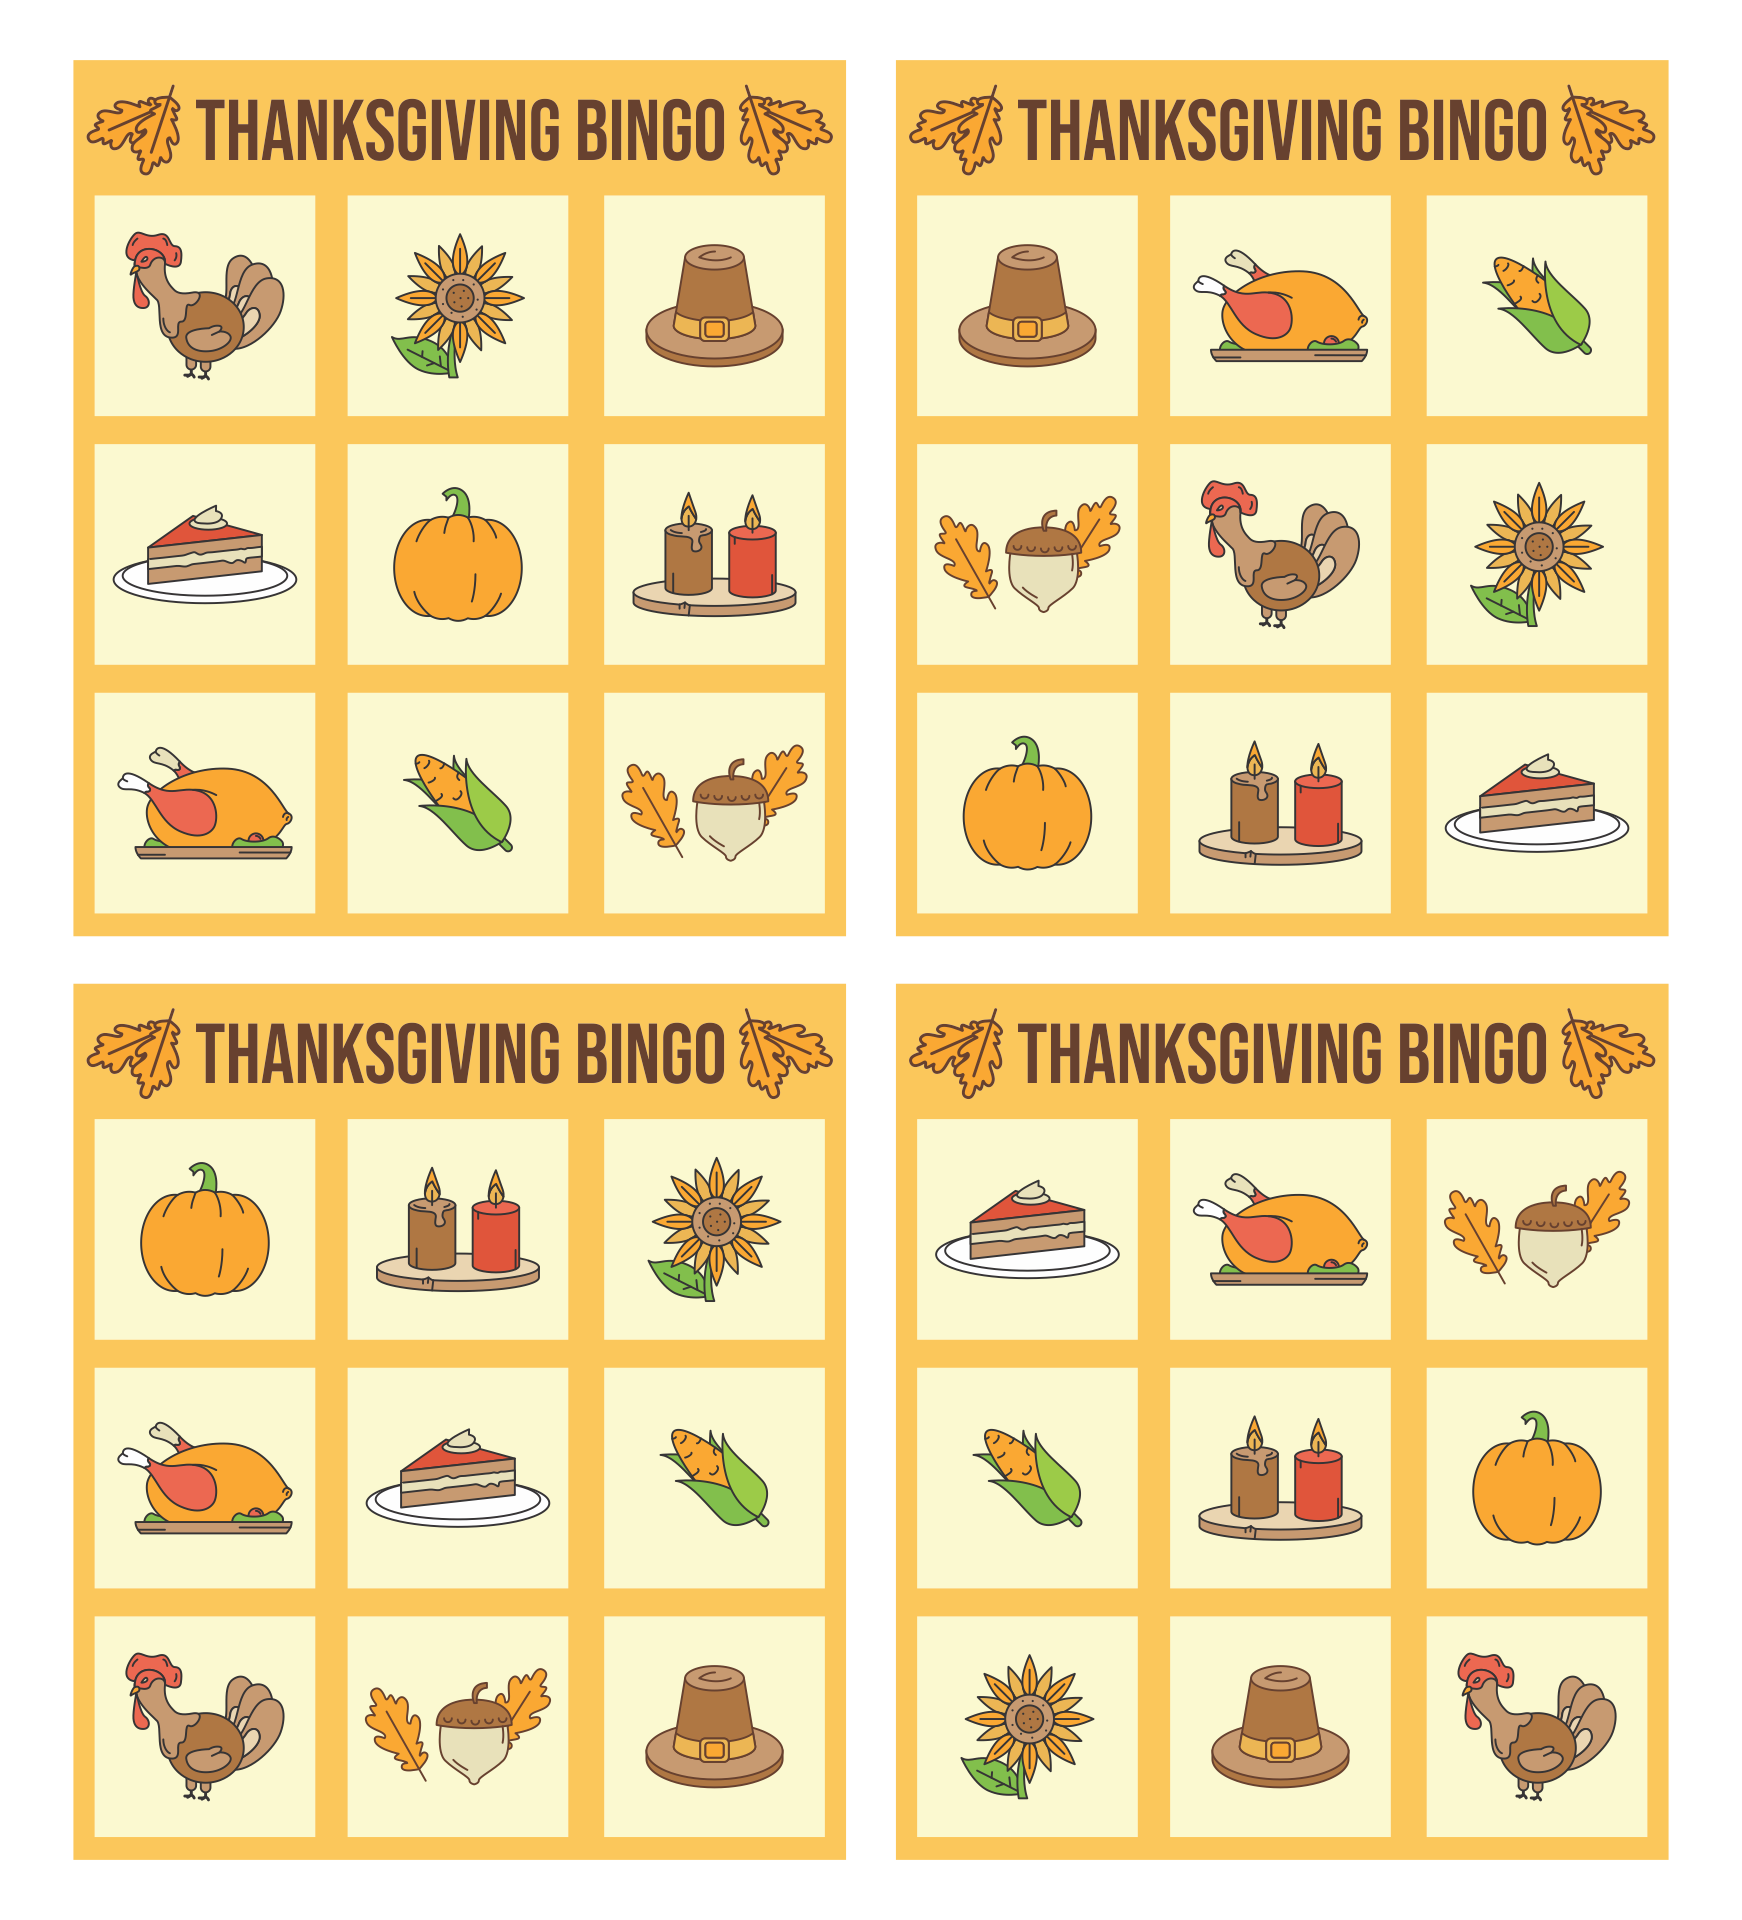 10 Best Adult Thanksgiving Games Printables Free - printablee.com - Thanksgiving Bingo Card Game Printable